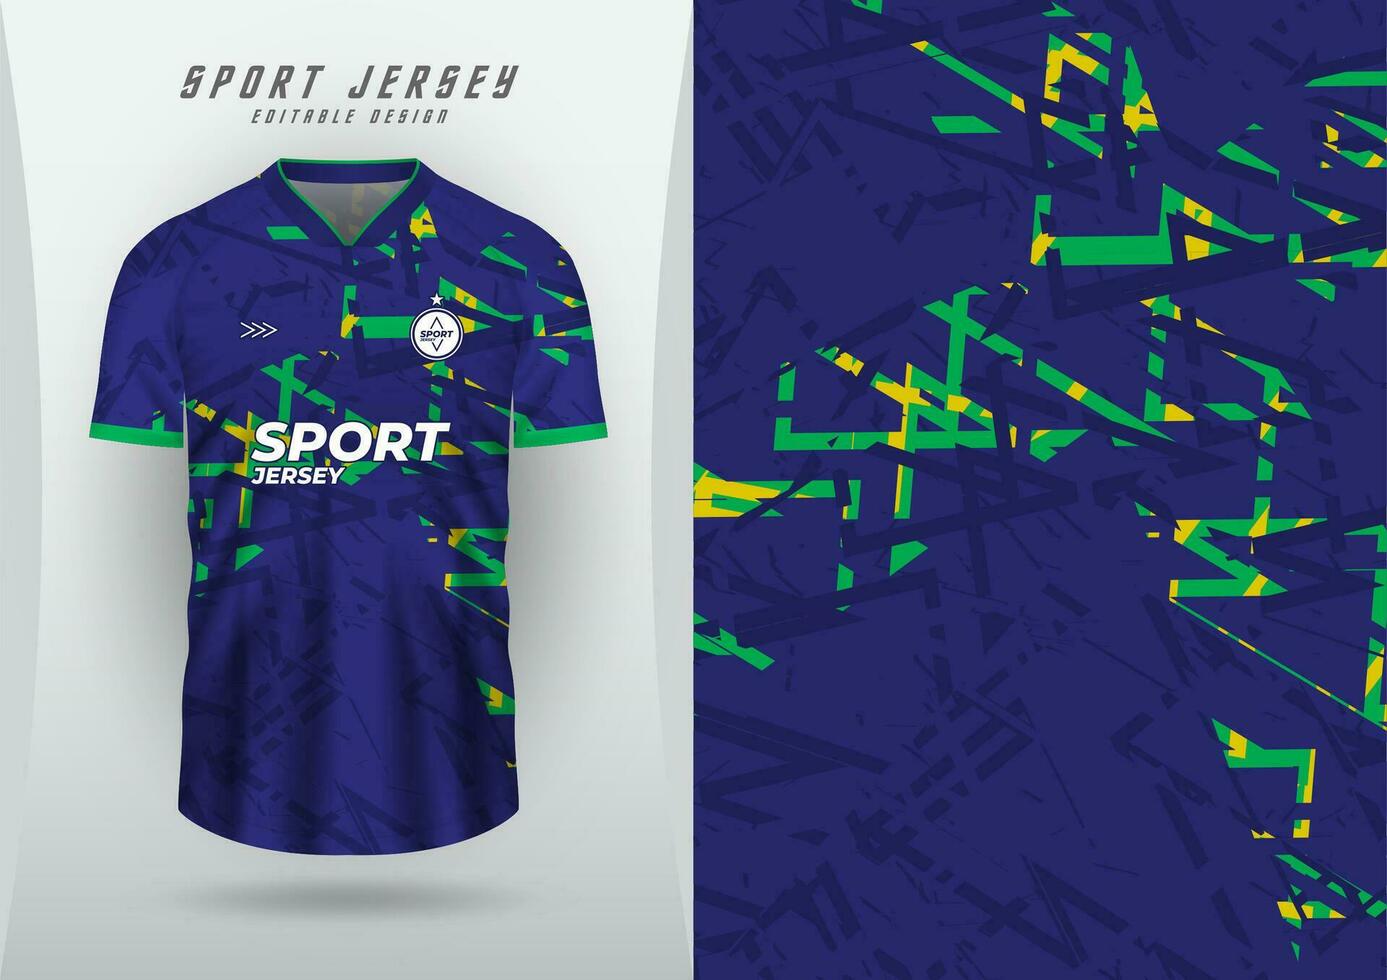 Background for sports jersey, soccer jersey, running jersey, racing jersey, blue-green-yellow grunge pattern. vector